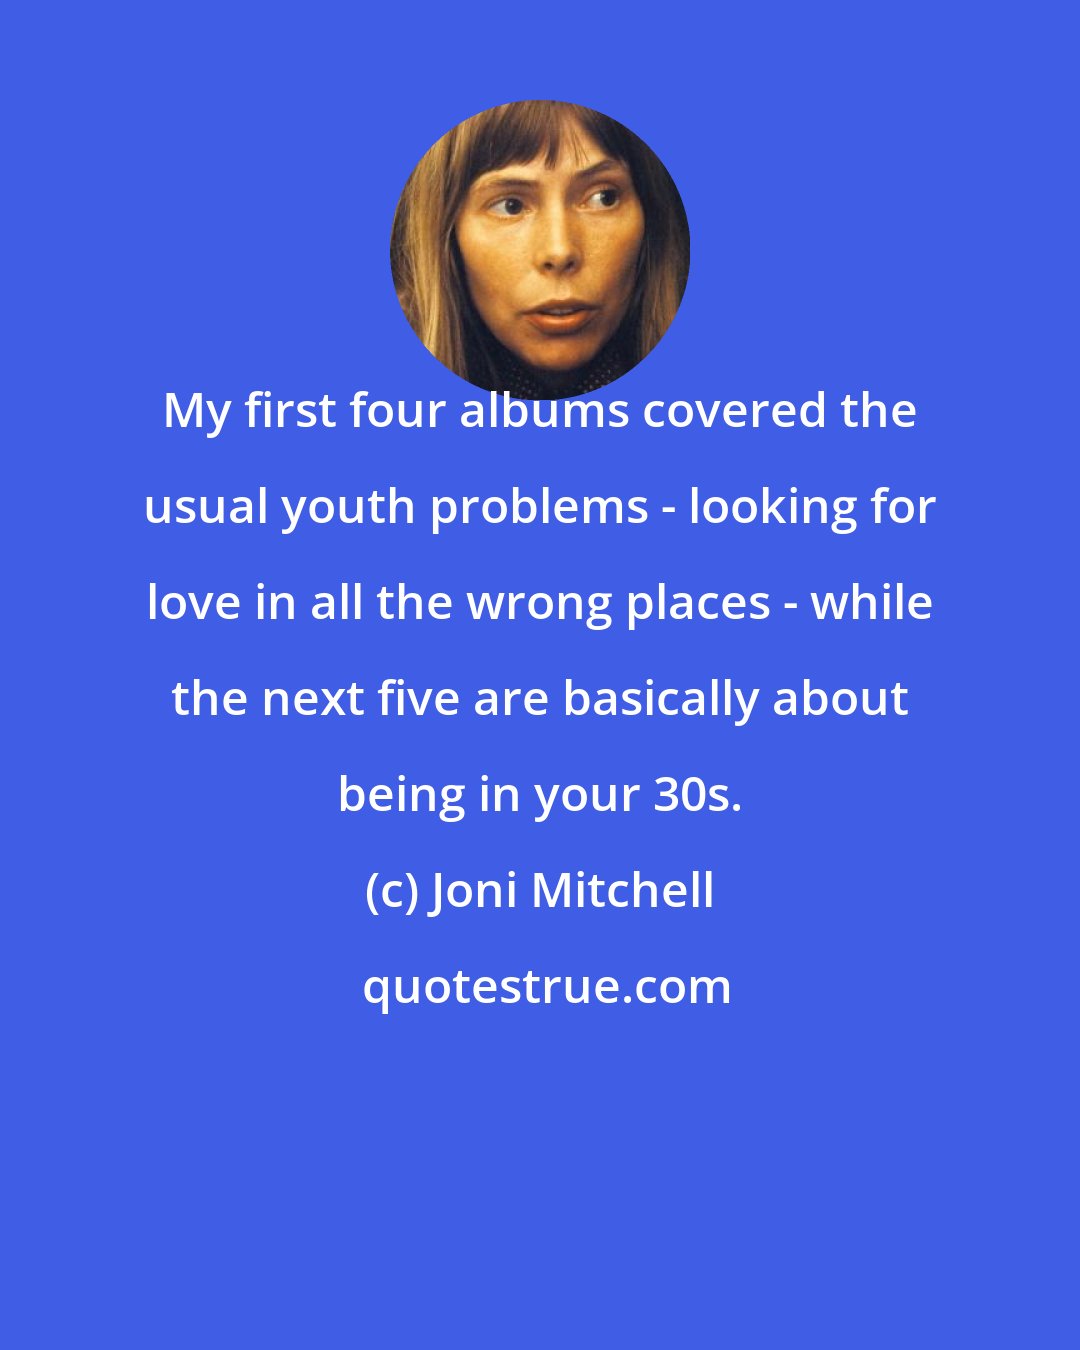 Joni Mitchell: My first four albums covered the usual youth problems - looking for love in all the wrong places - while the next five are basically about being in your 30s.